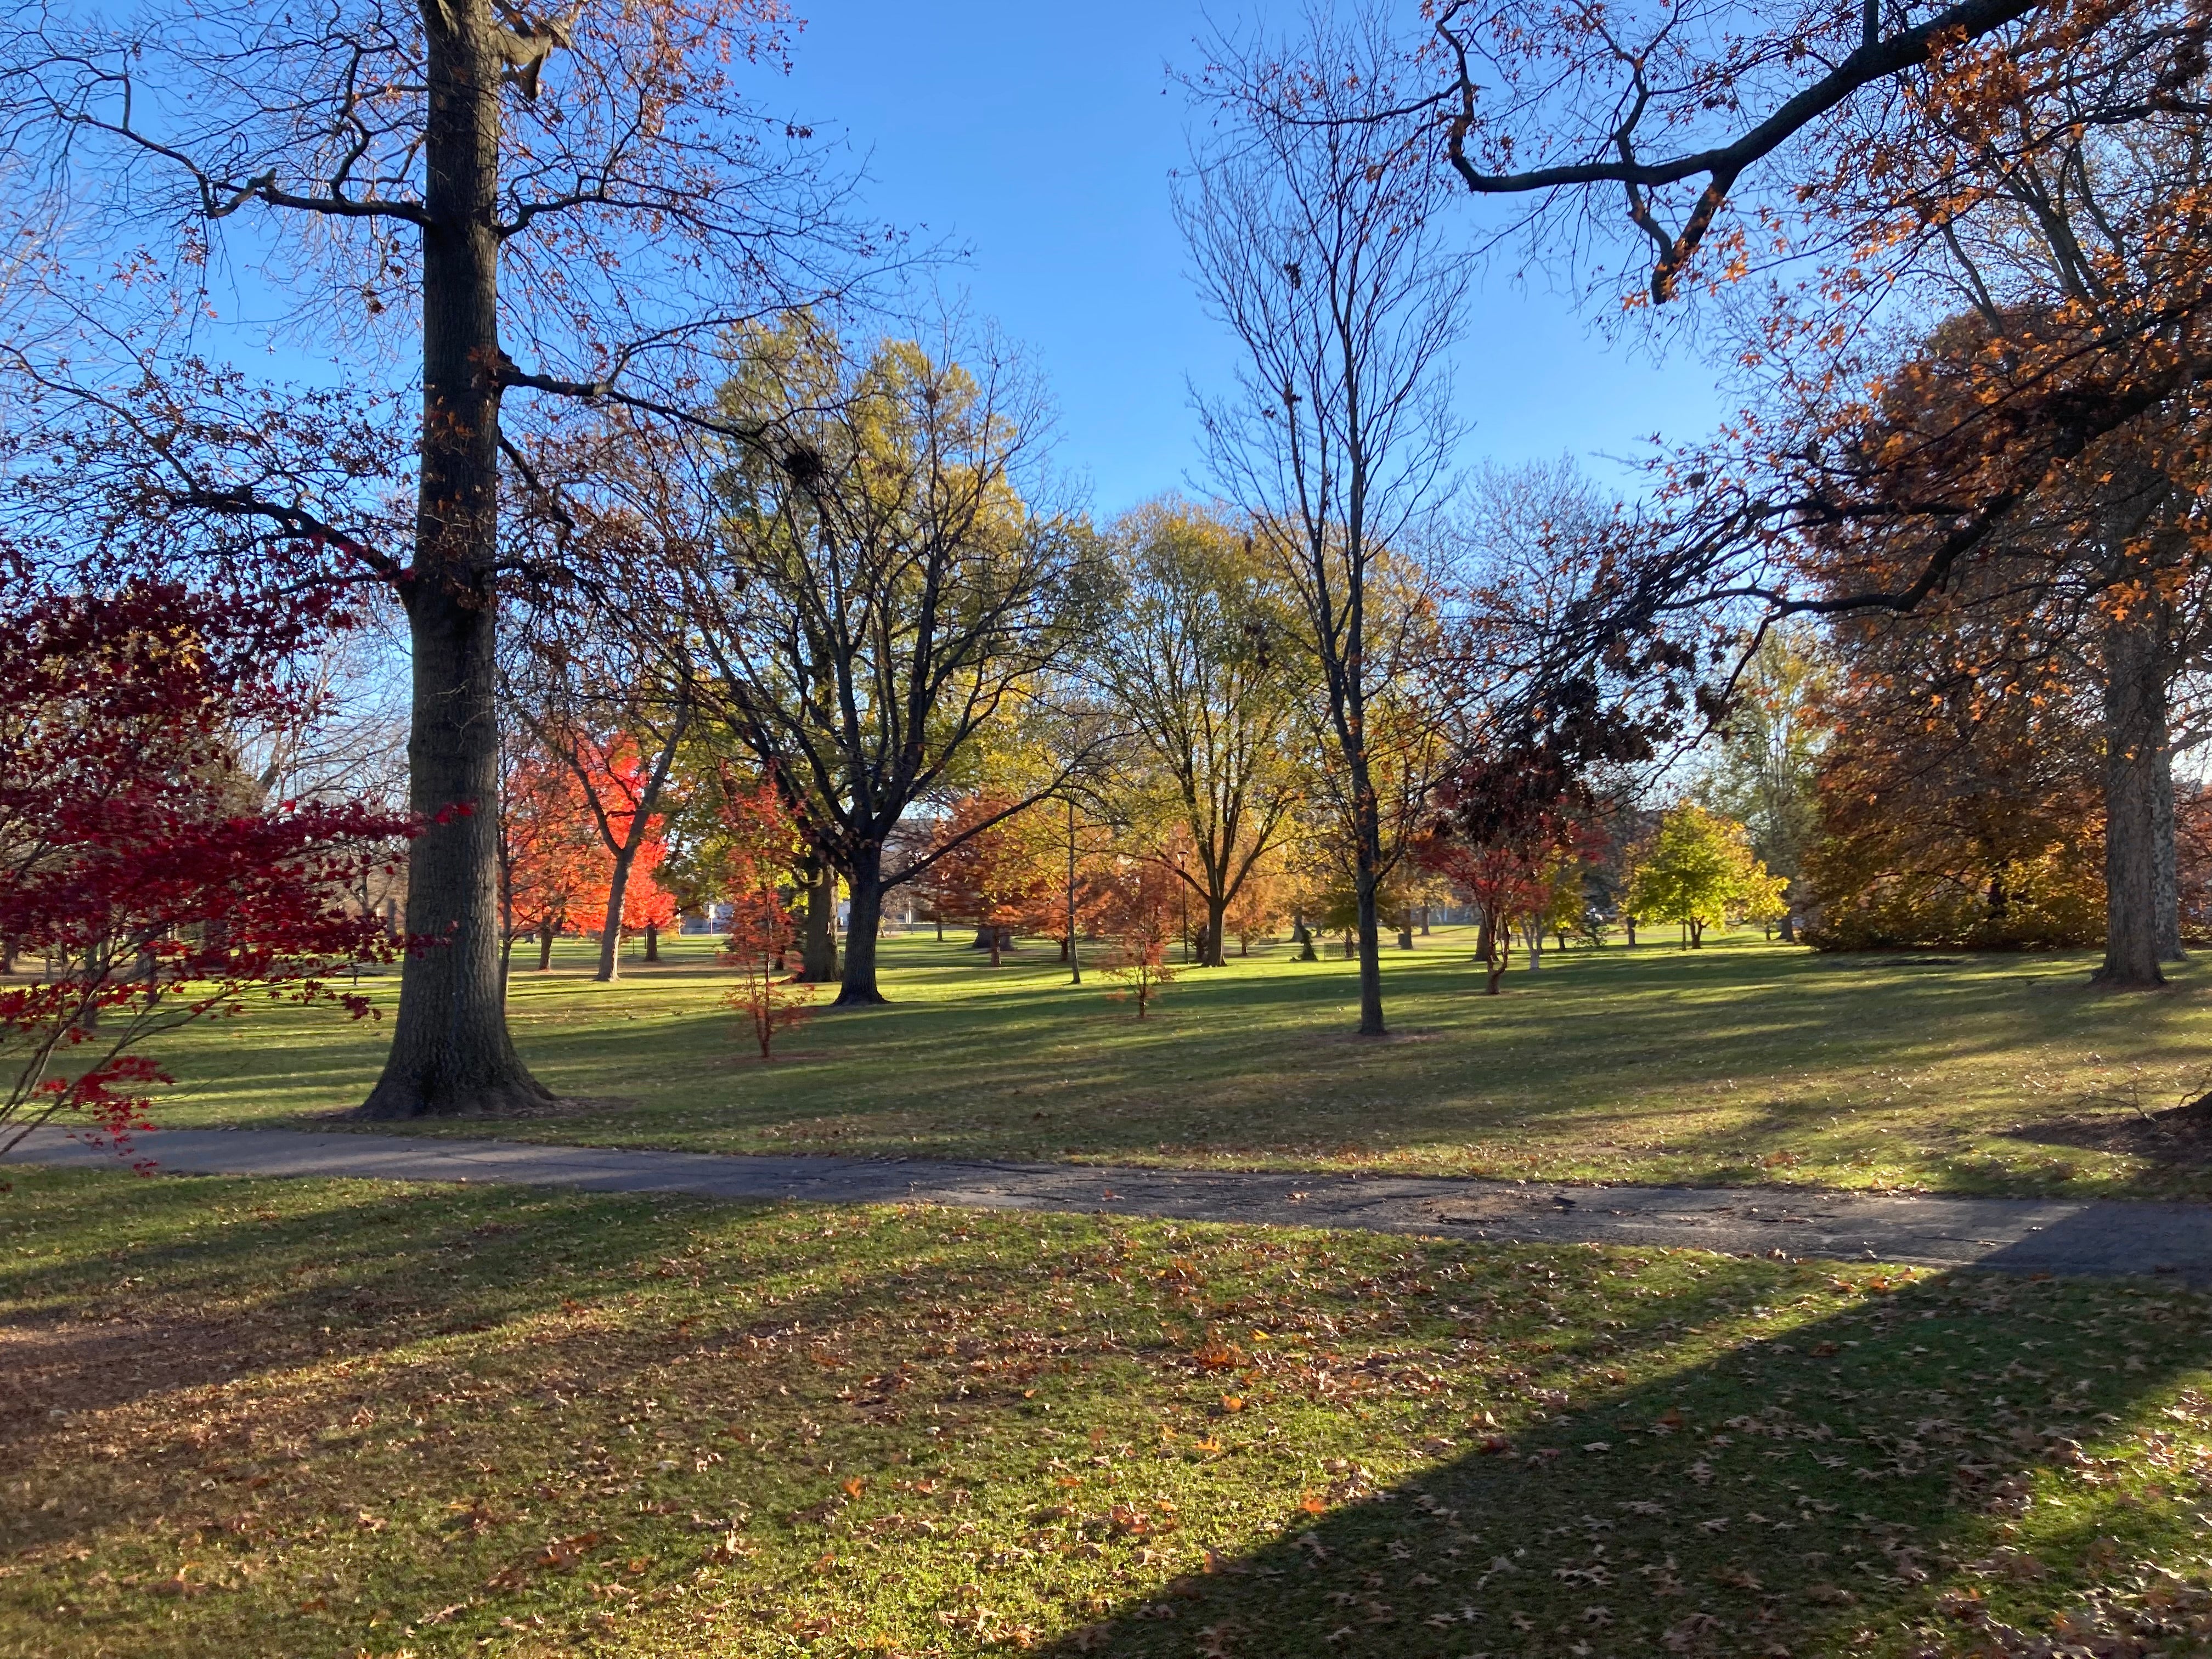 A view across Tappan Square in autumn.